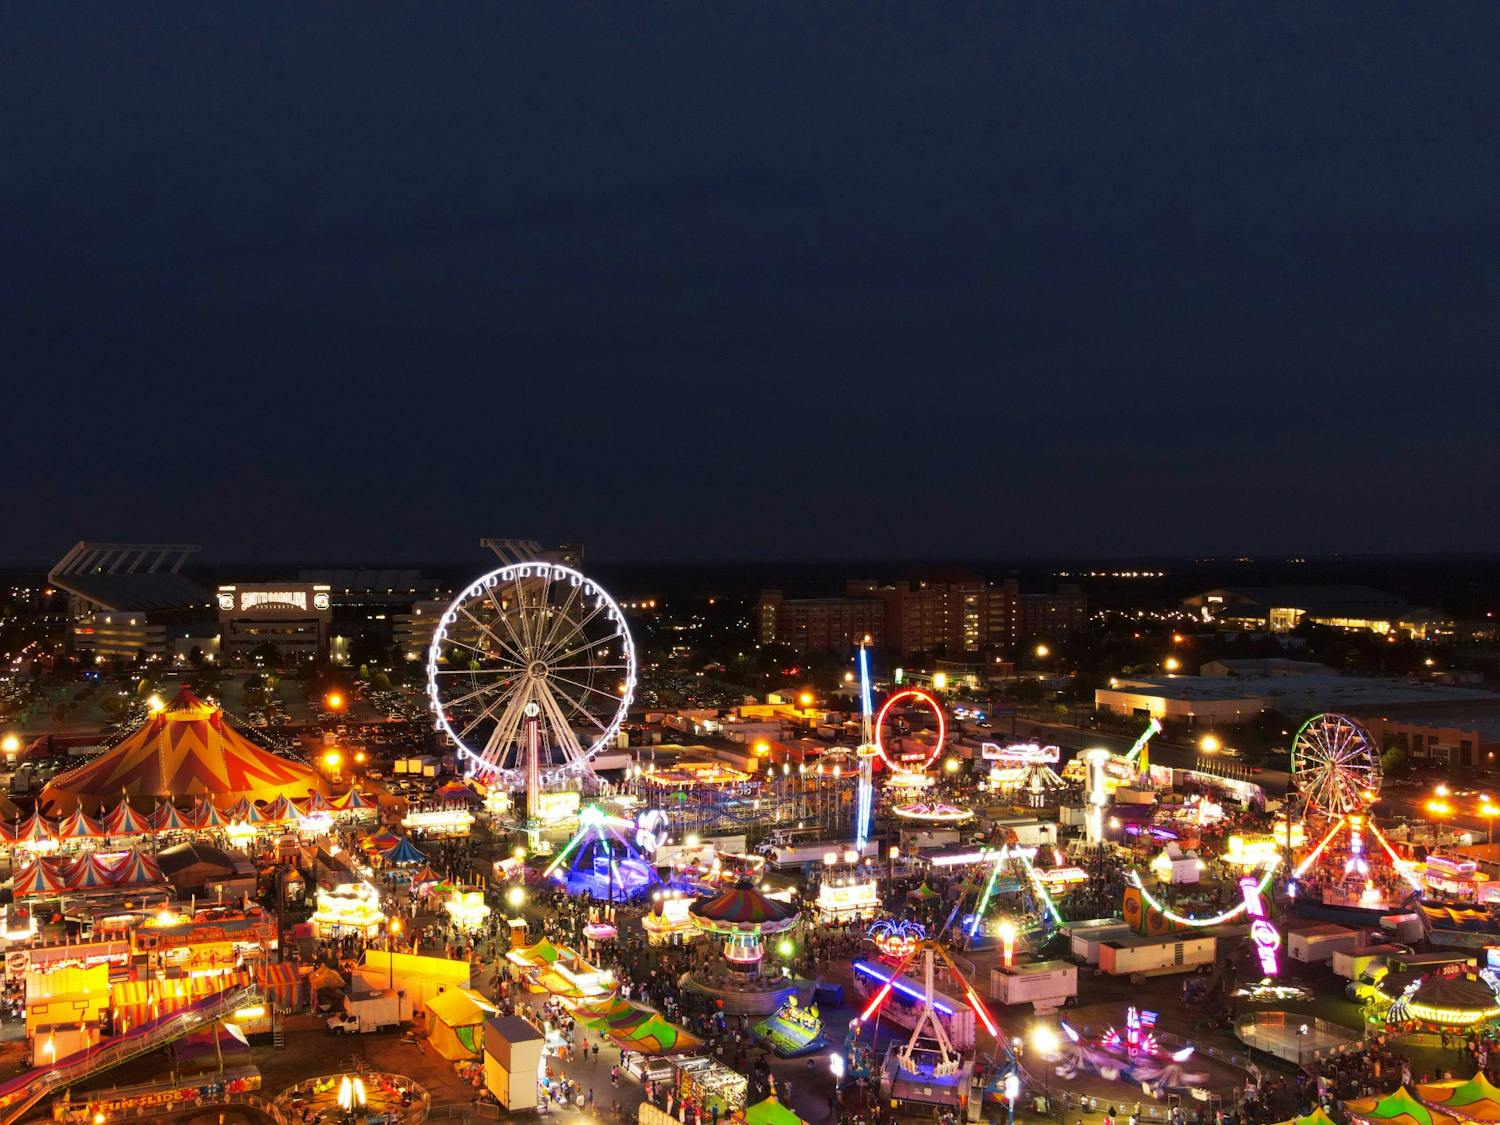 The South Carolina State Fair is a widely anticipated event, and attending has become a tradition for many. It is the biggest fair in the state, and the colorful attractions, charismatic performers and fun atmosphere draw thousands of people from across the country. This year, the 152nd annual fair was held from Oct. 13, 2021 to Oct. 24, 2021. Throughout those 12 days and nights, fair-goers enjoyed games, rides, food and fun. The fair serves as a reminder that traditions do not have to be ceremonious or formal in order to be significant — the festive, informal and playful State Fair is a part of our shared experience.